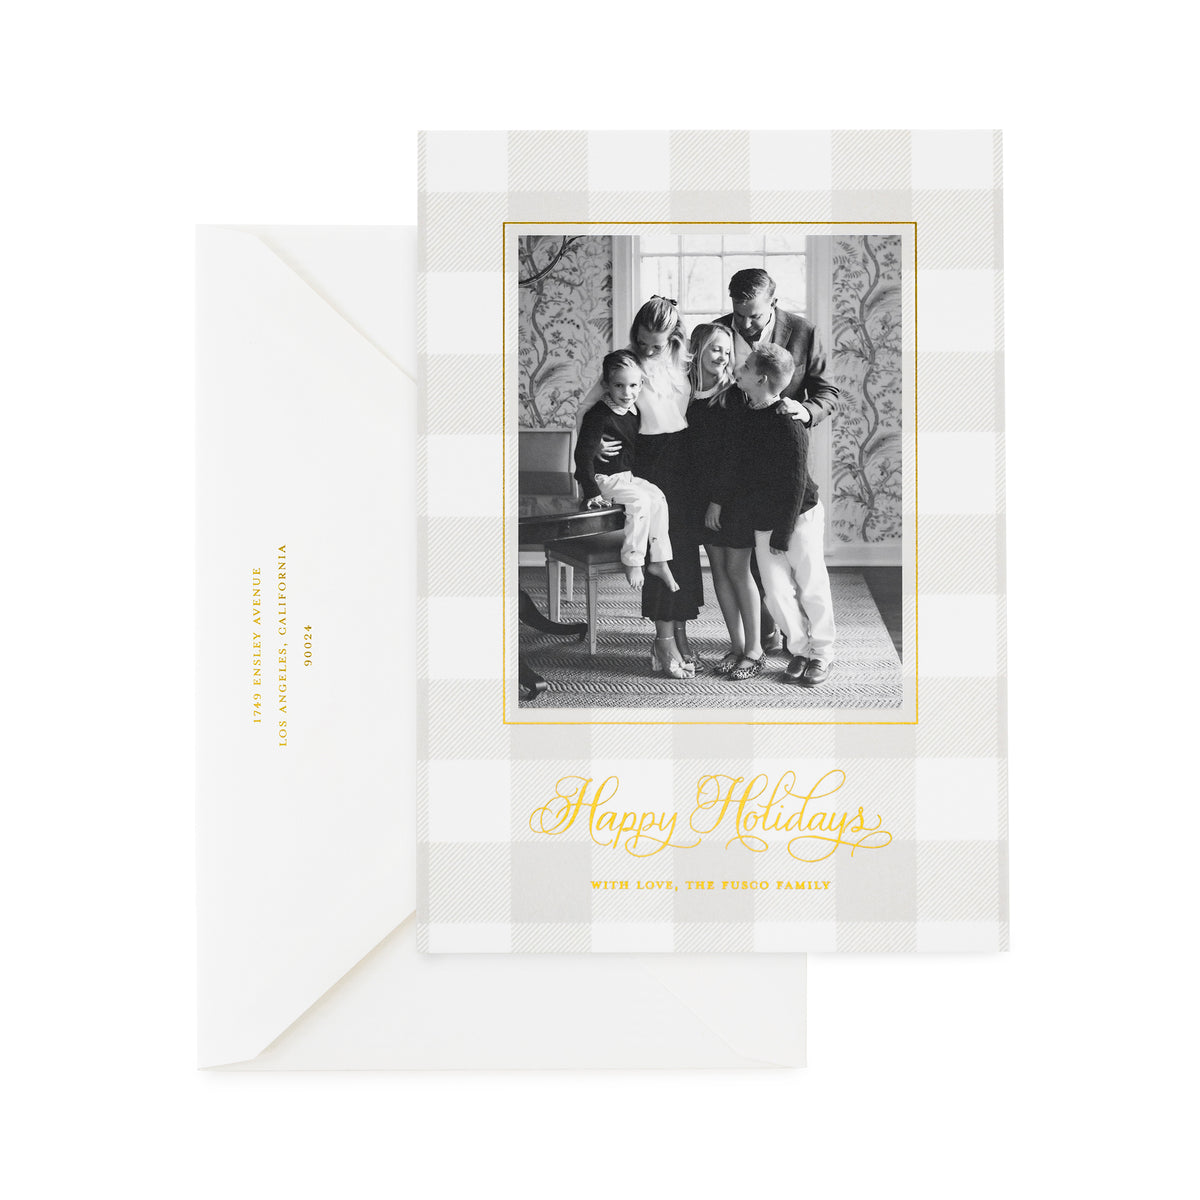 Green gingham custom holiday photo card with gold foil and envelope closed